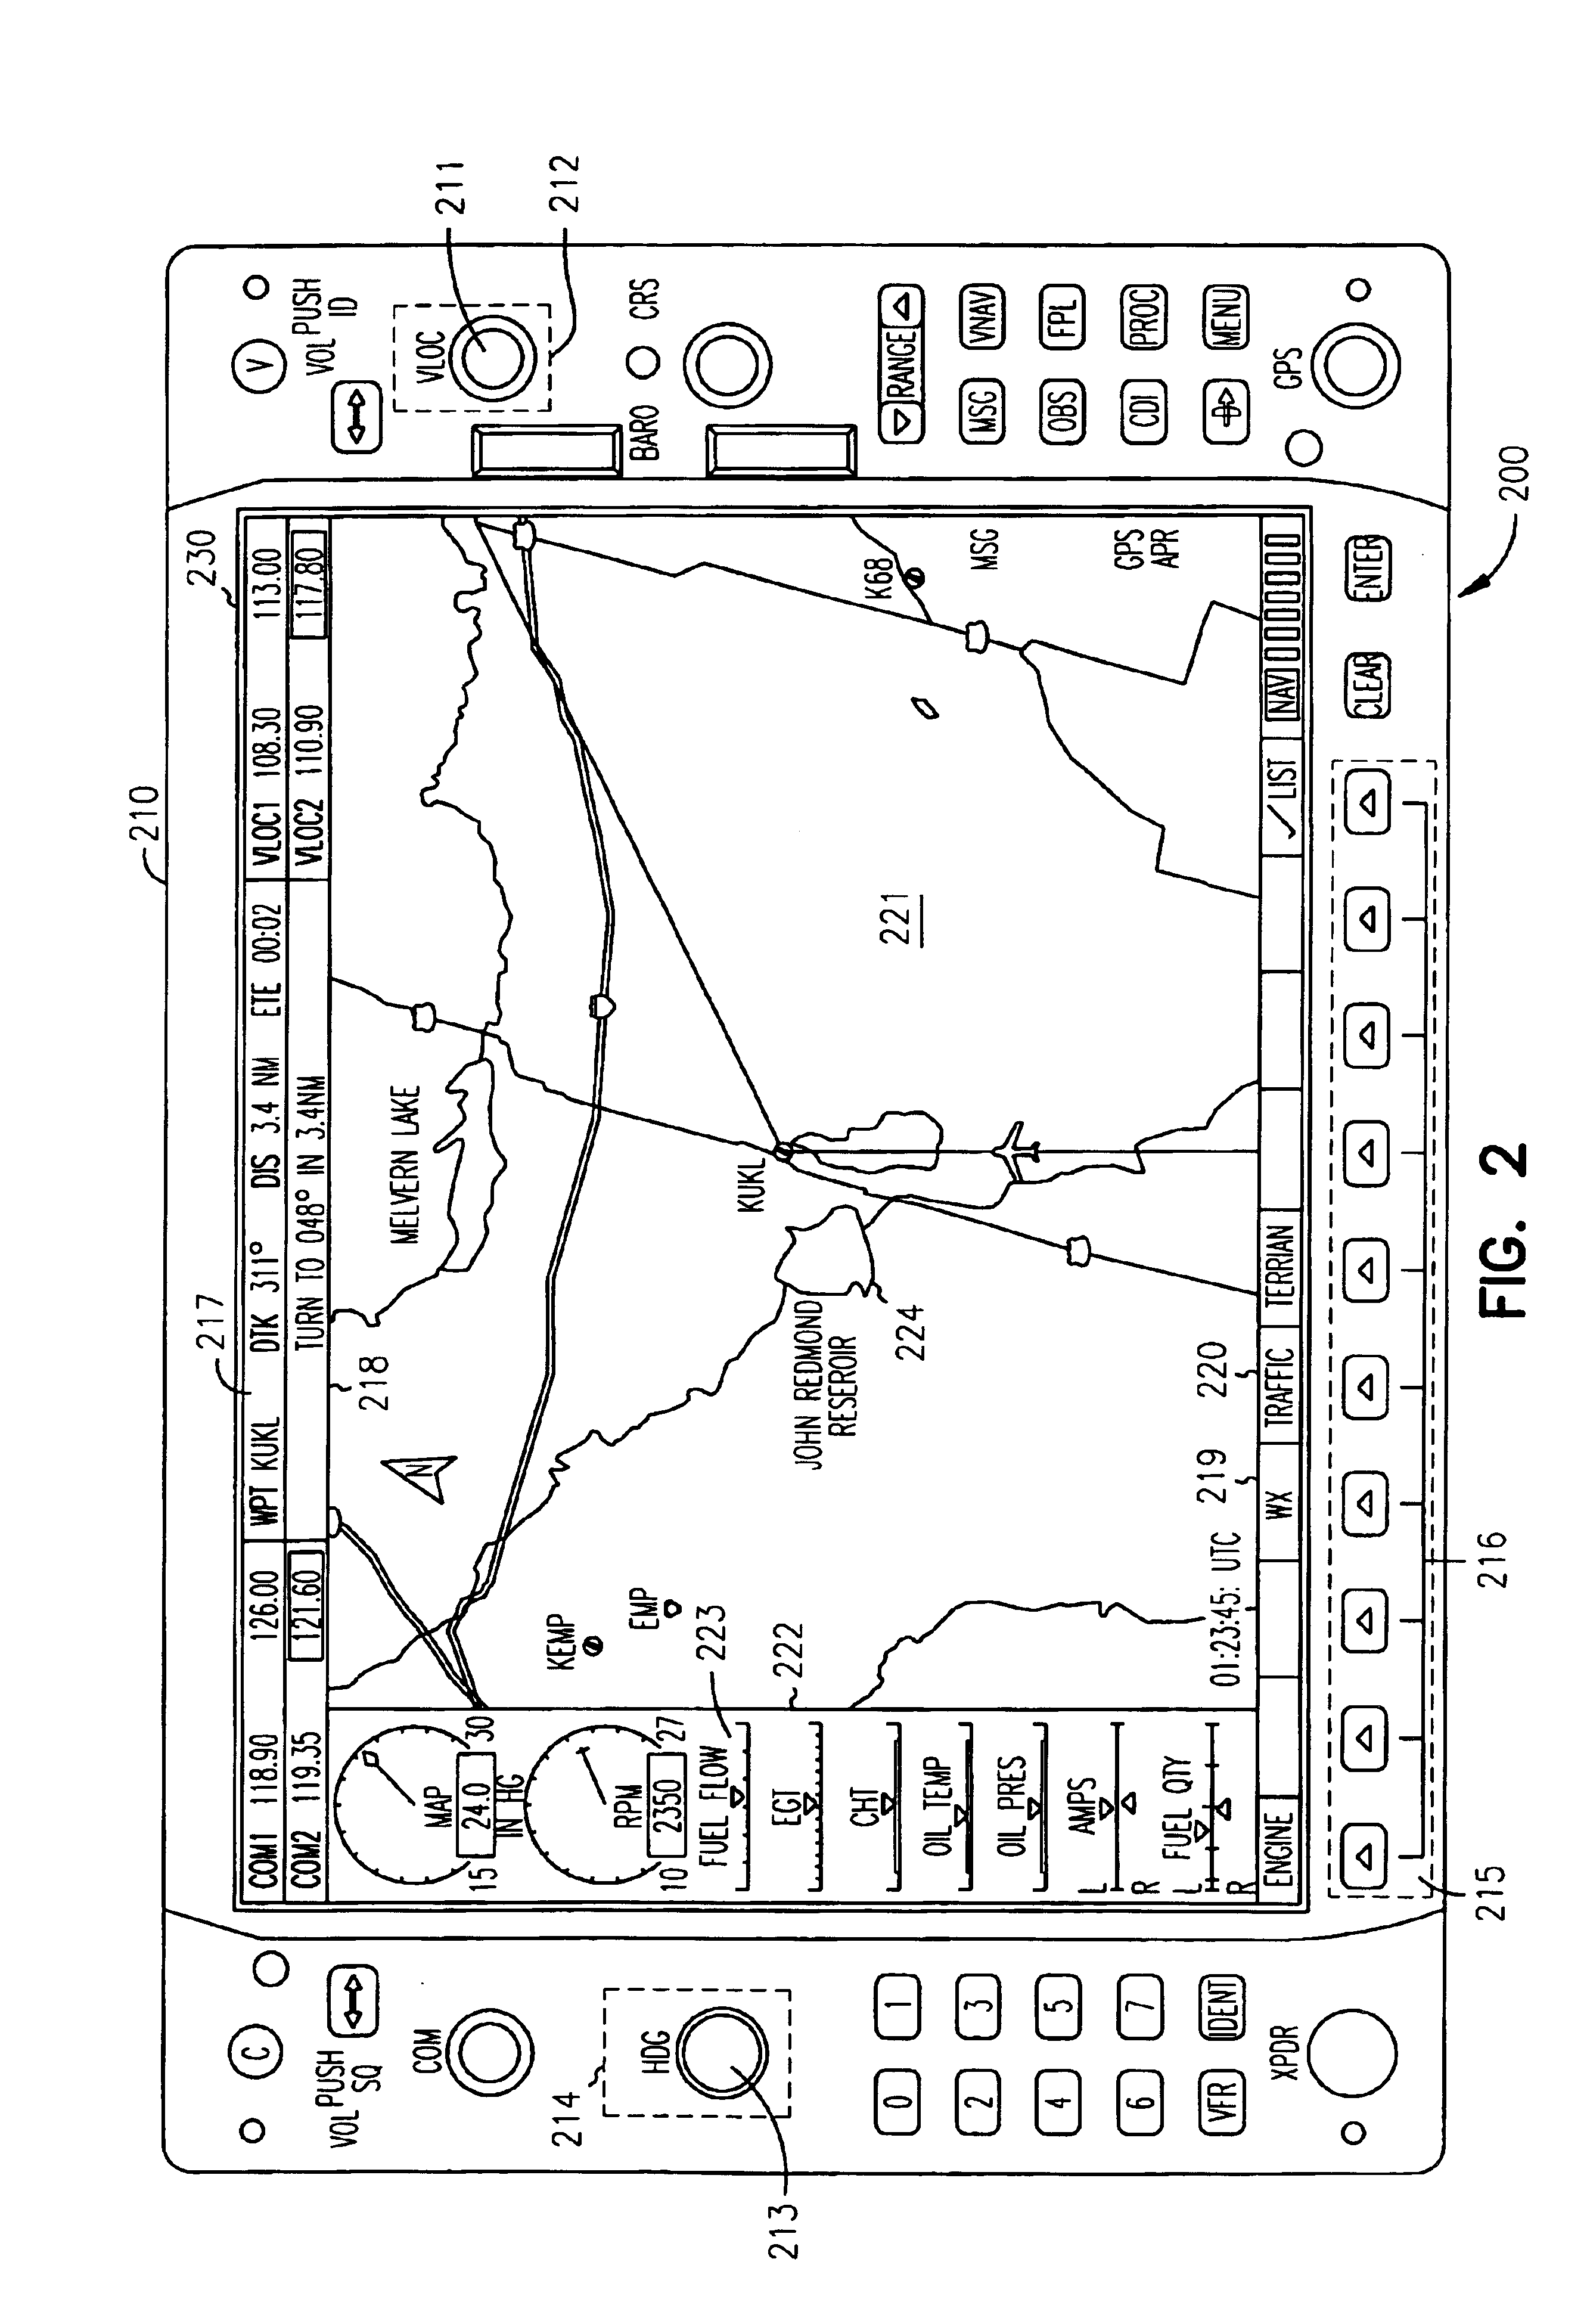 Customizable cockpit display systems and methods of customizing the presentation of cockpit data